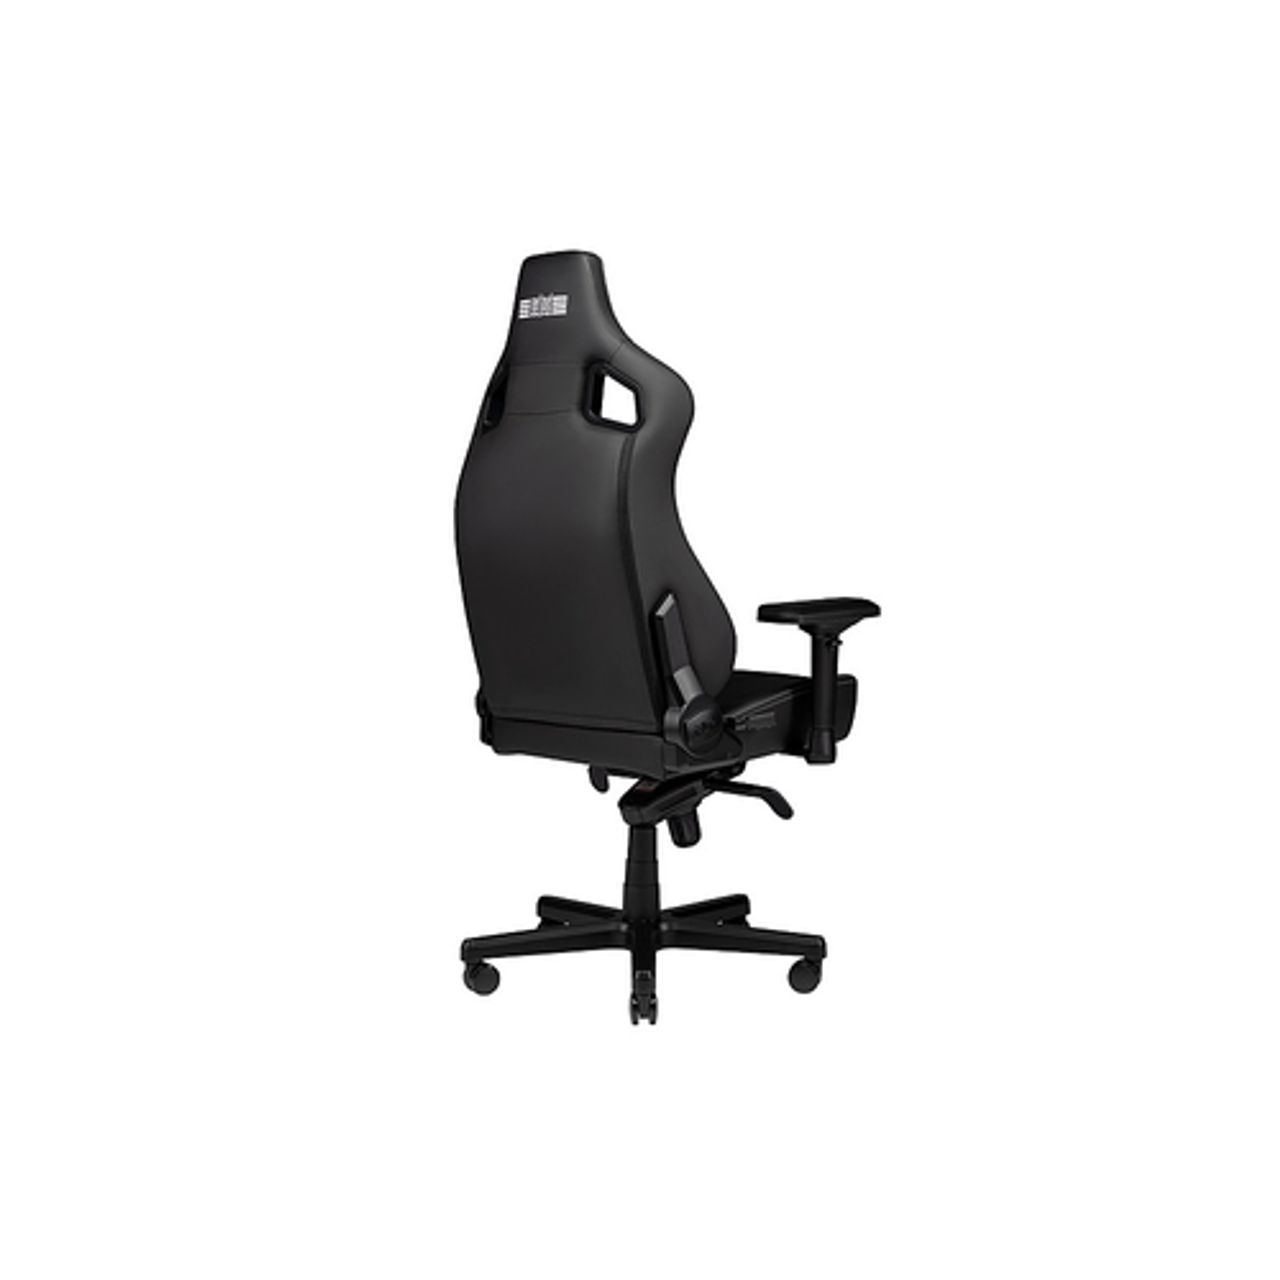 Next Level Racing - Elite Gaming Chair Leather and Suede Edition - Black